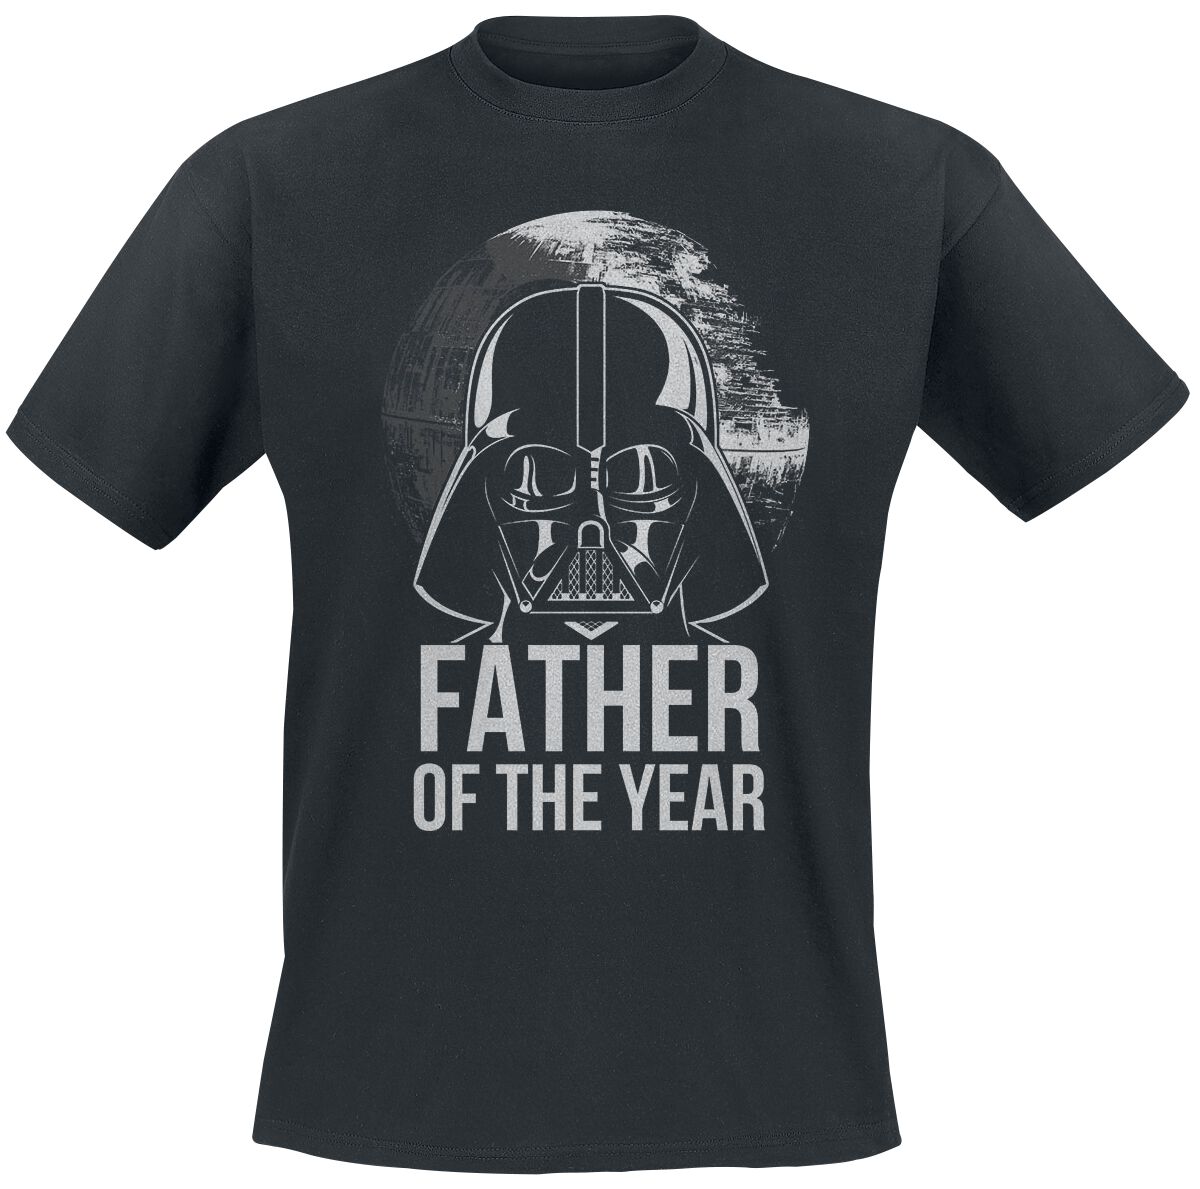 Star Wars Darth Vader - Father Of The Year T-Shirt schwarz in L